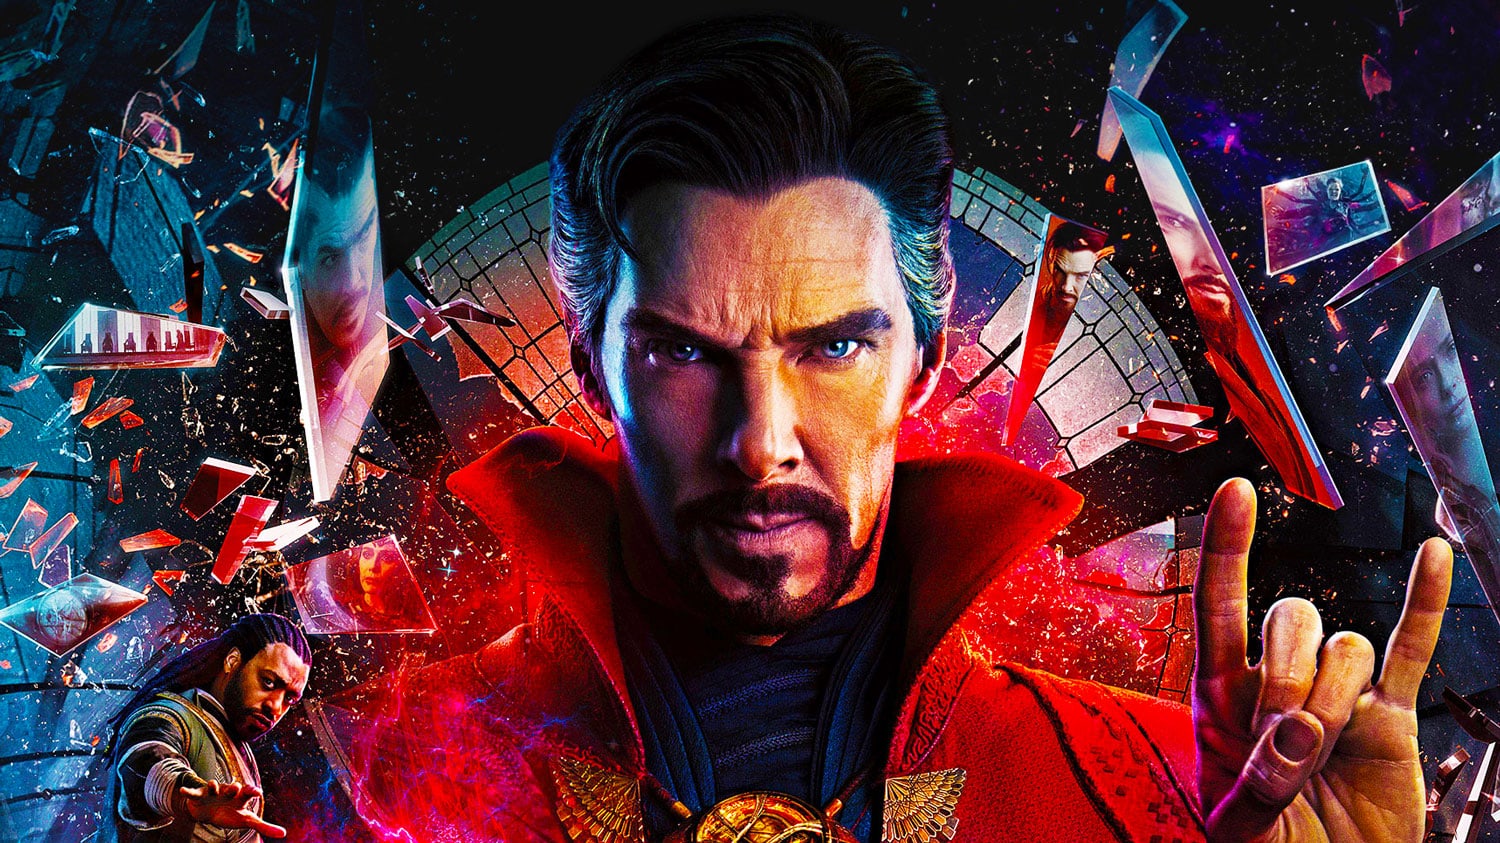 Doctor Strange 2 Home Release Date Revealed - Deleted Scenes Included